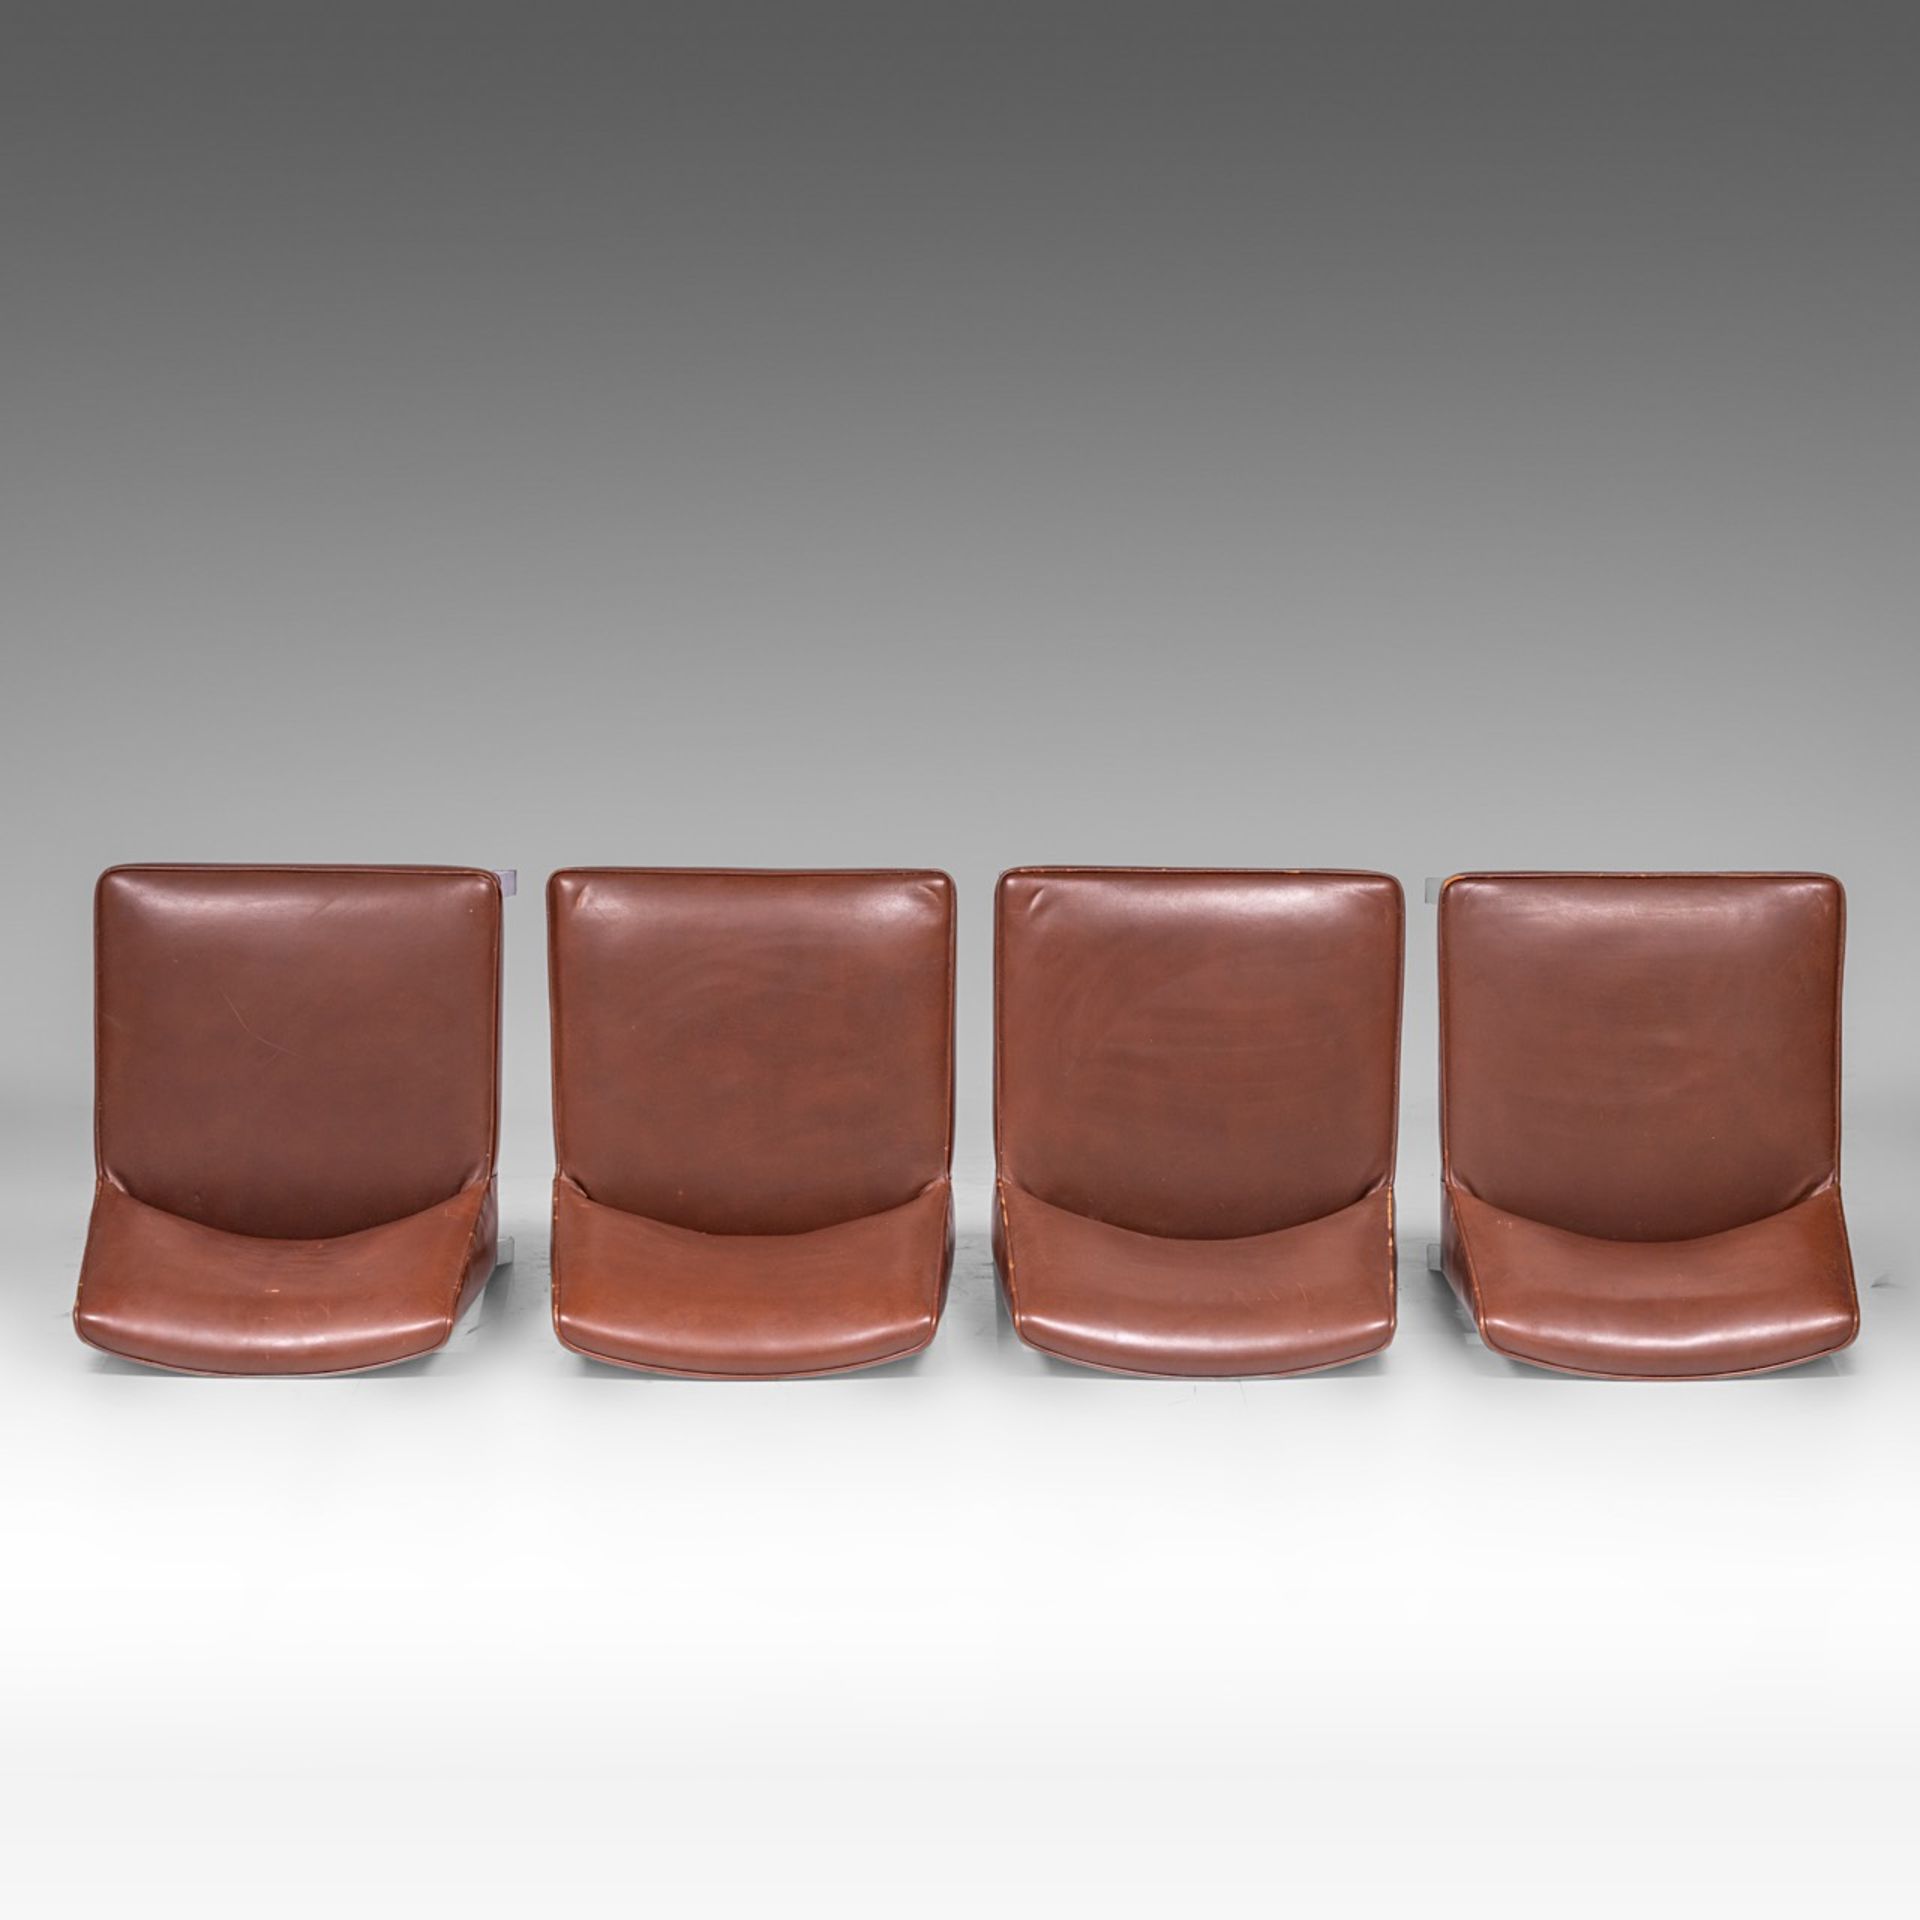 A set of four Jules Wabbes (1919-1974) chairs in brown leather and lacquered metal, H 79 cm - Image 8 of 9